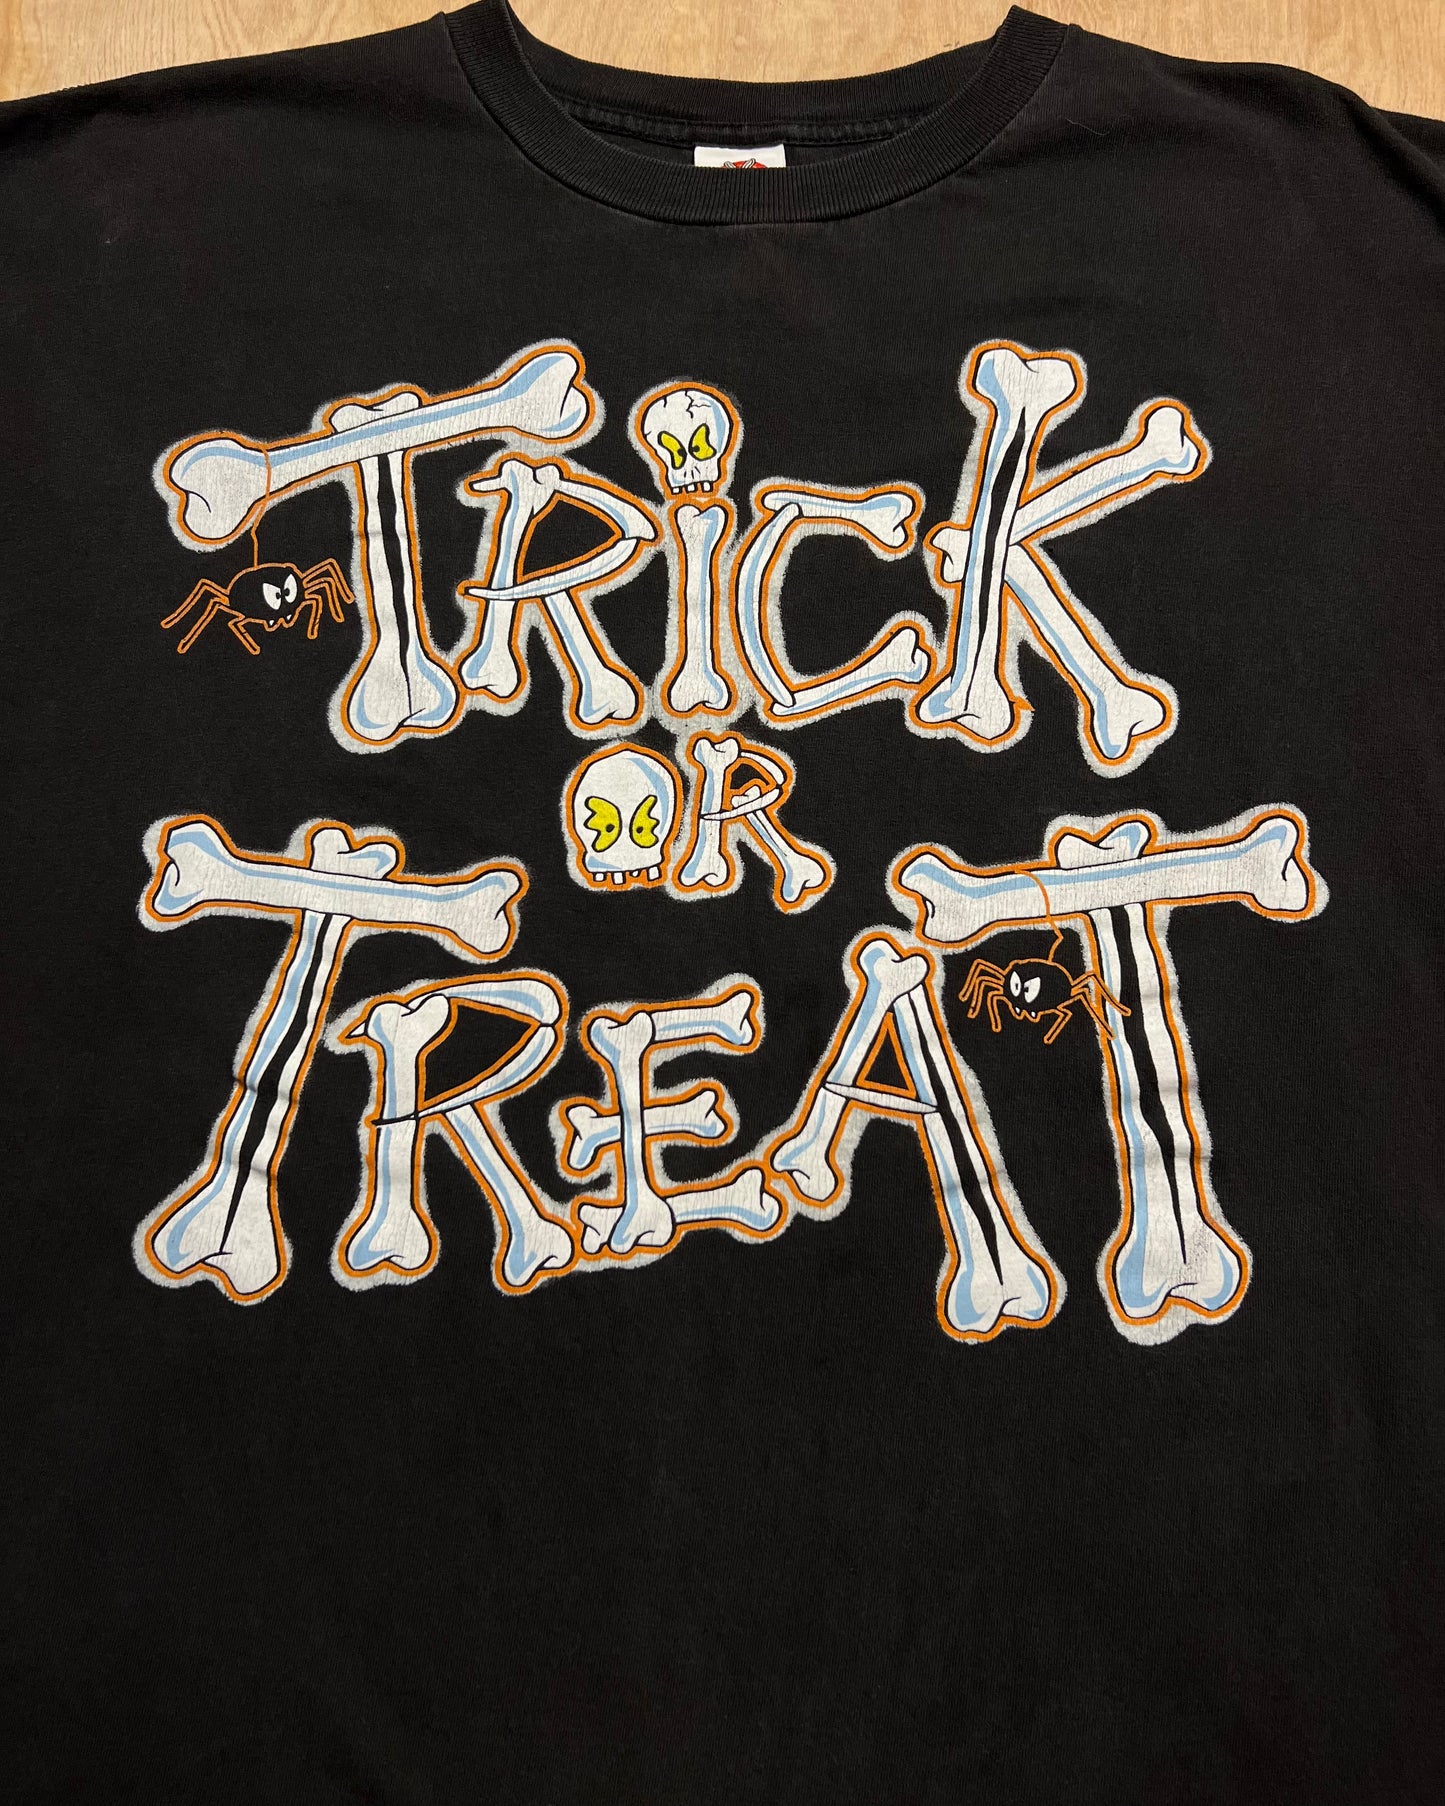 1998 Looney Tunes Trick or Treat T-Shirt